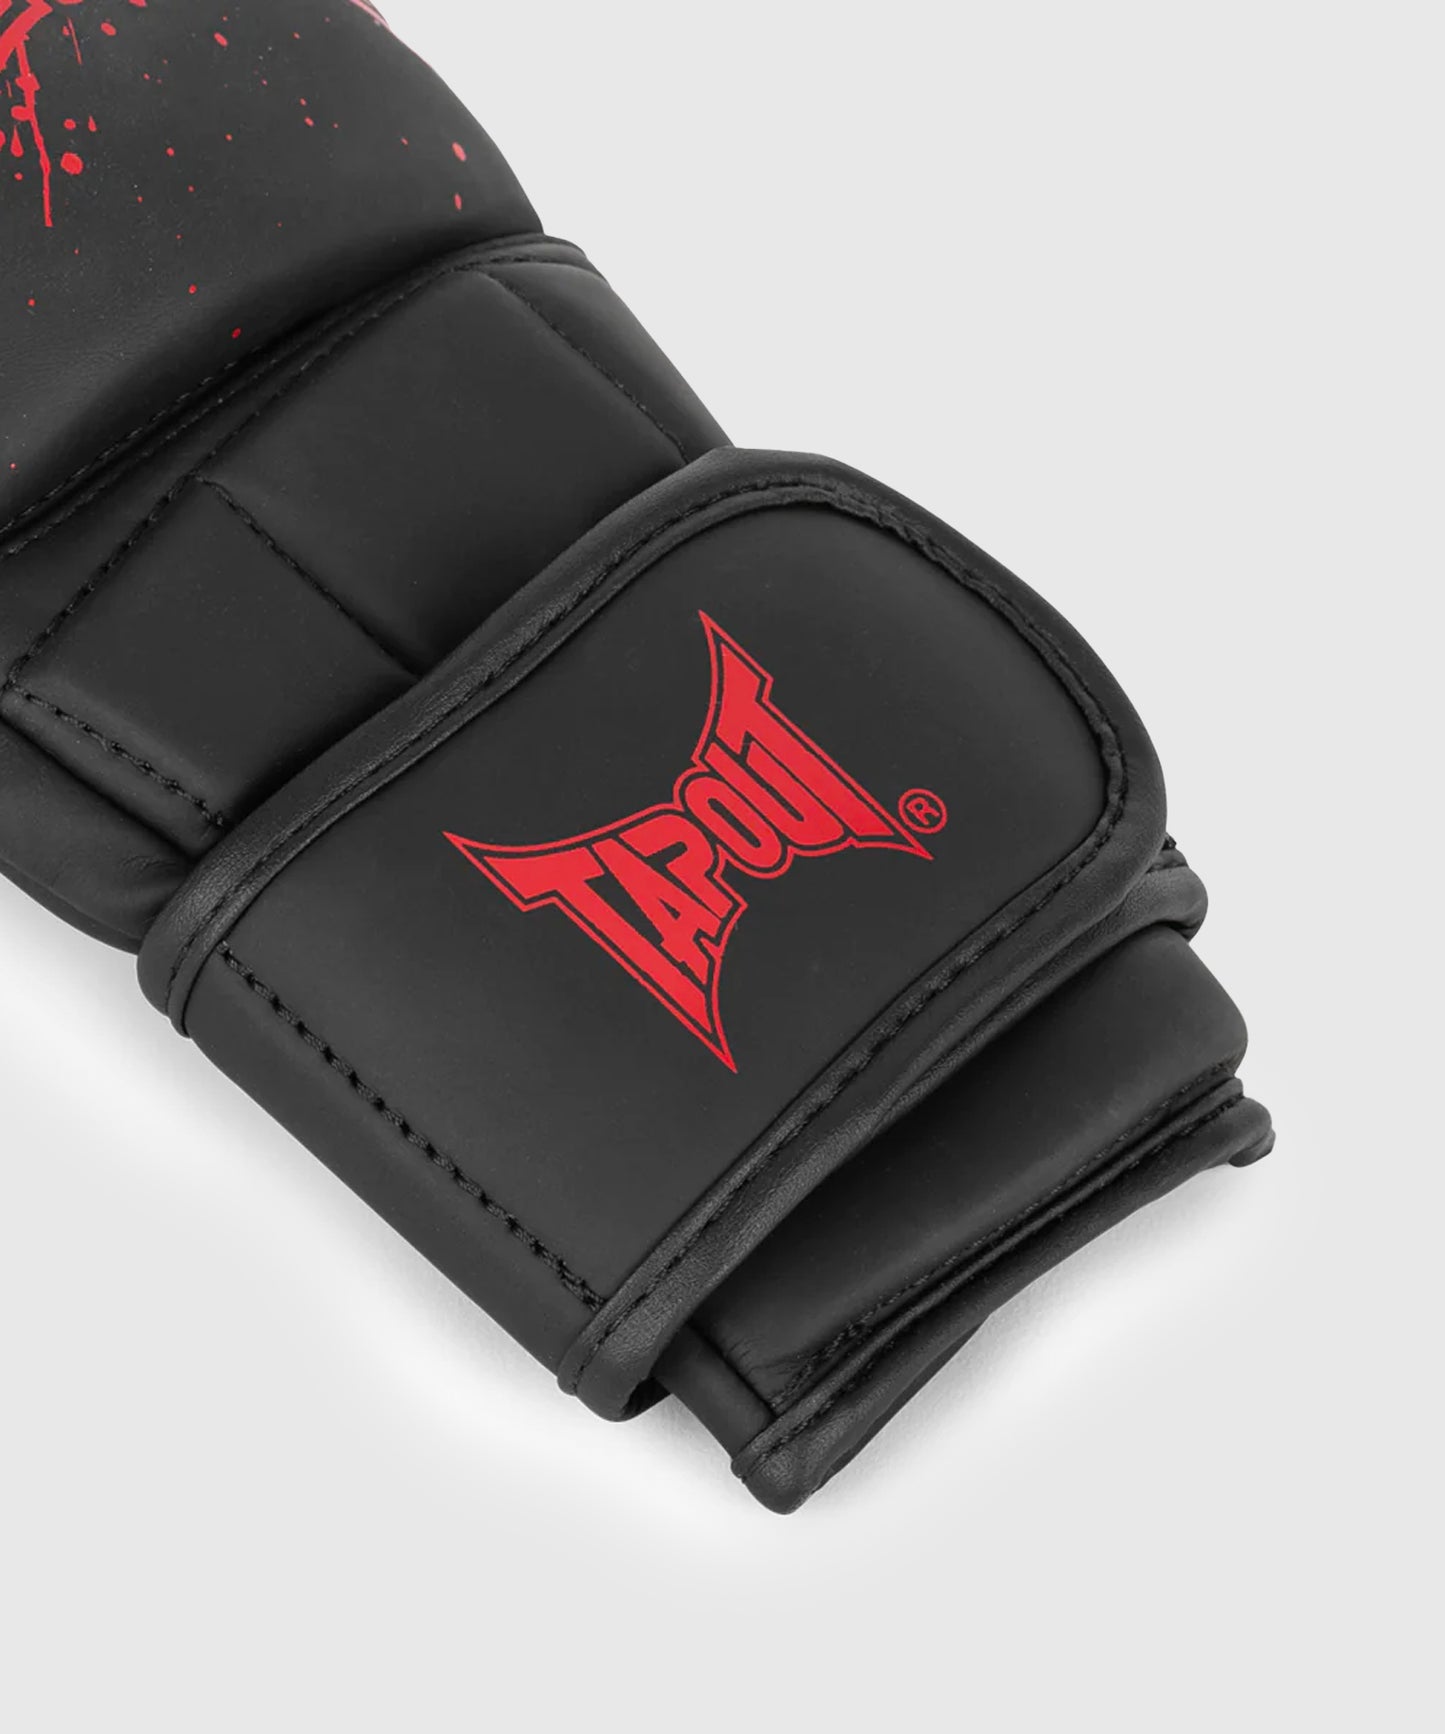 Tapout Rancho Mma Sparring-Handschuhe - Schwarz/Rot